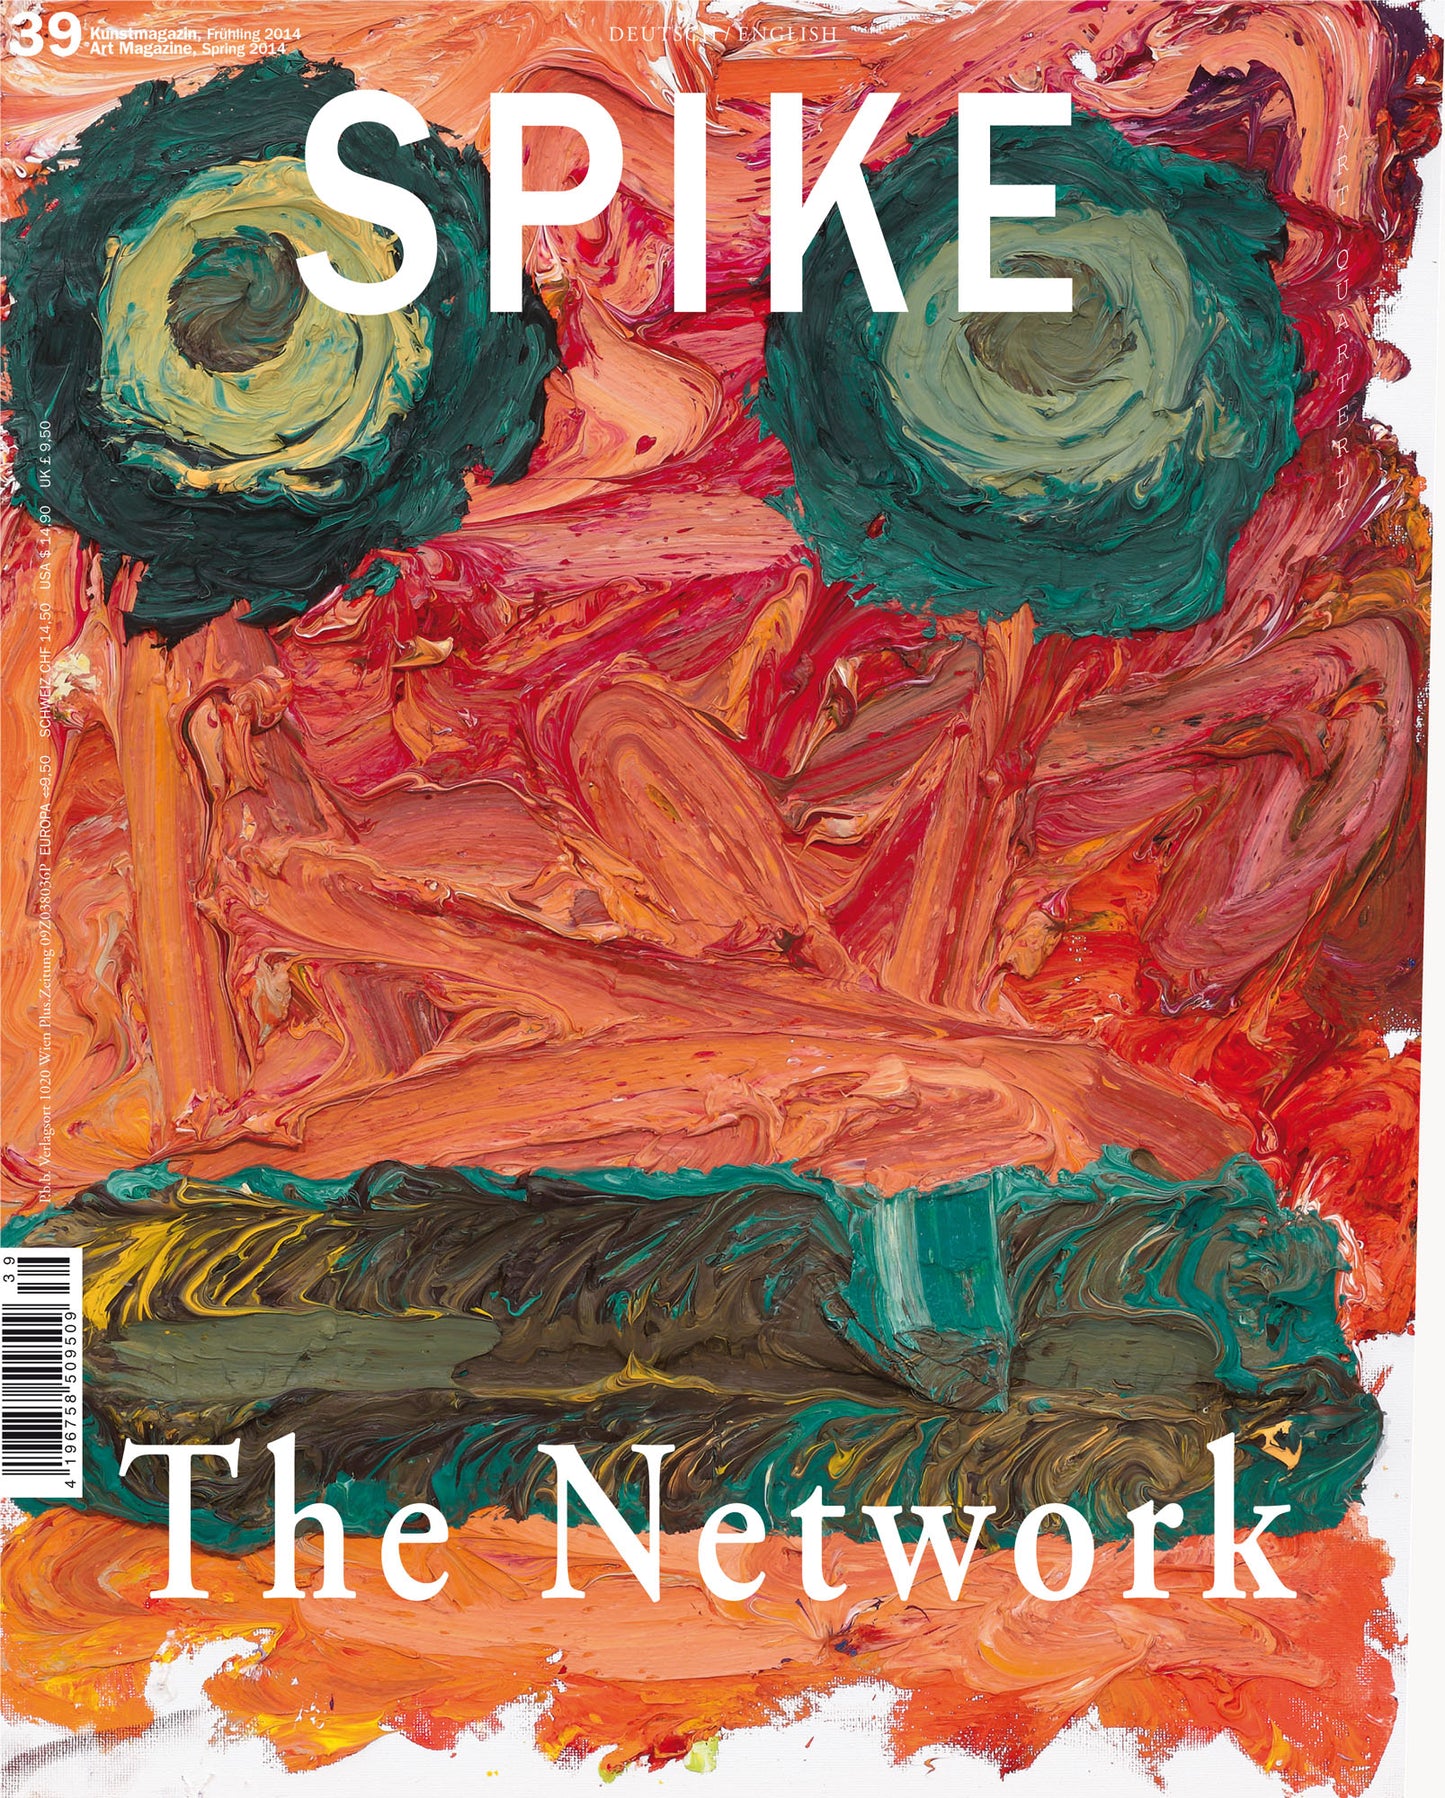 ISSUE 39 (SPRING 2014): The Network